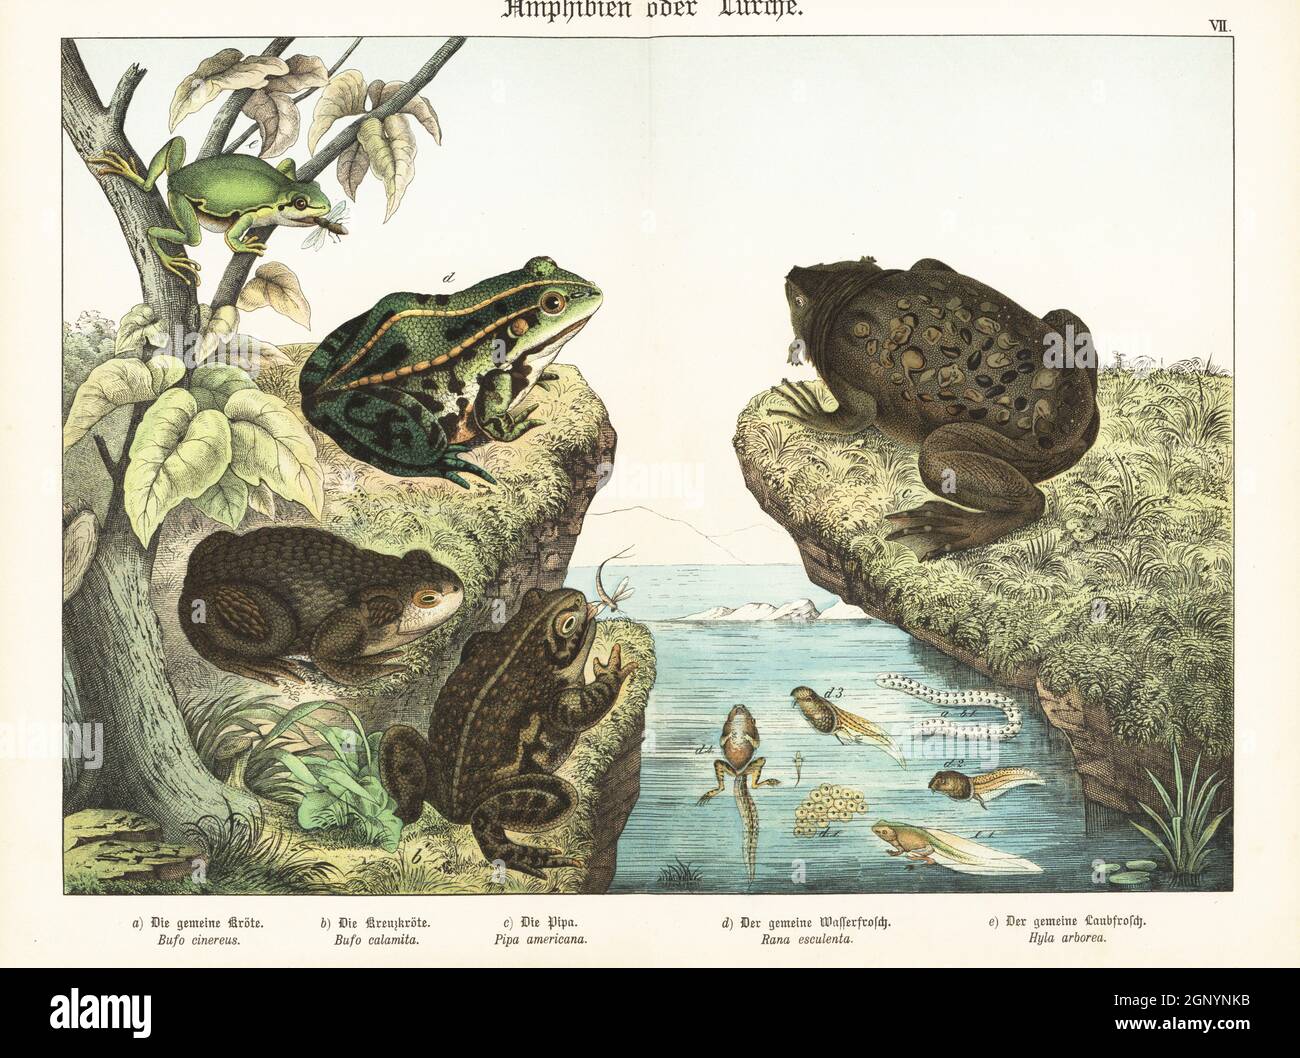 Common toad, Bufo bufo a, natterjack toad, Epidalea calamita b, common Surinam toad with young in its back, Pipa pipa c, edible frog with tadpoles, Pelophylax esculentus d, and European tree frog, Hyla arborea e. Chromolithograph from Gotthilf Heinrich von Schubert's Natural History of Animal Kingdoms for School and Home (Naturgeschichte des Tierreichs fur Schule und Haus), Schreiber, Munich, 1886. Stock Photo